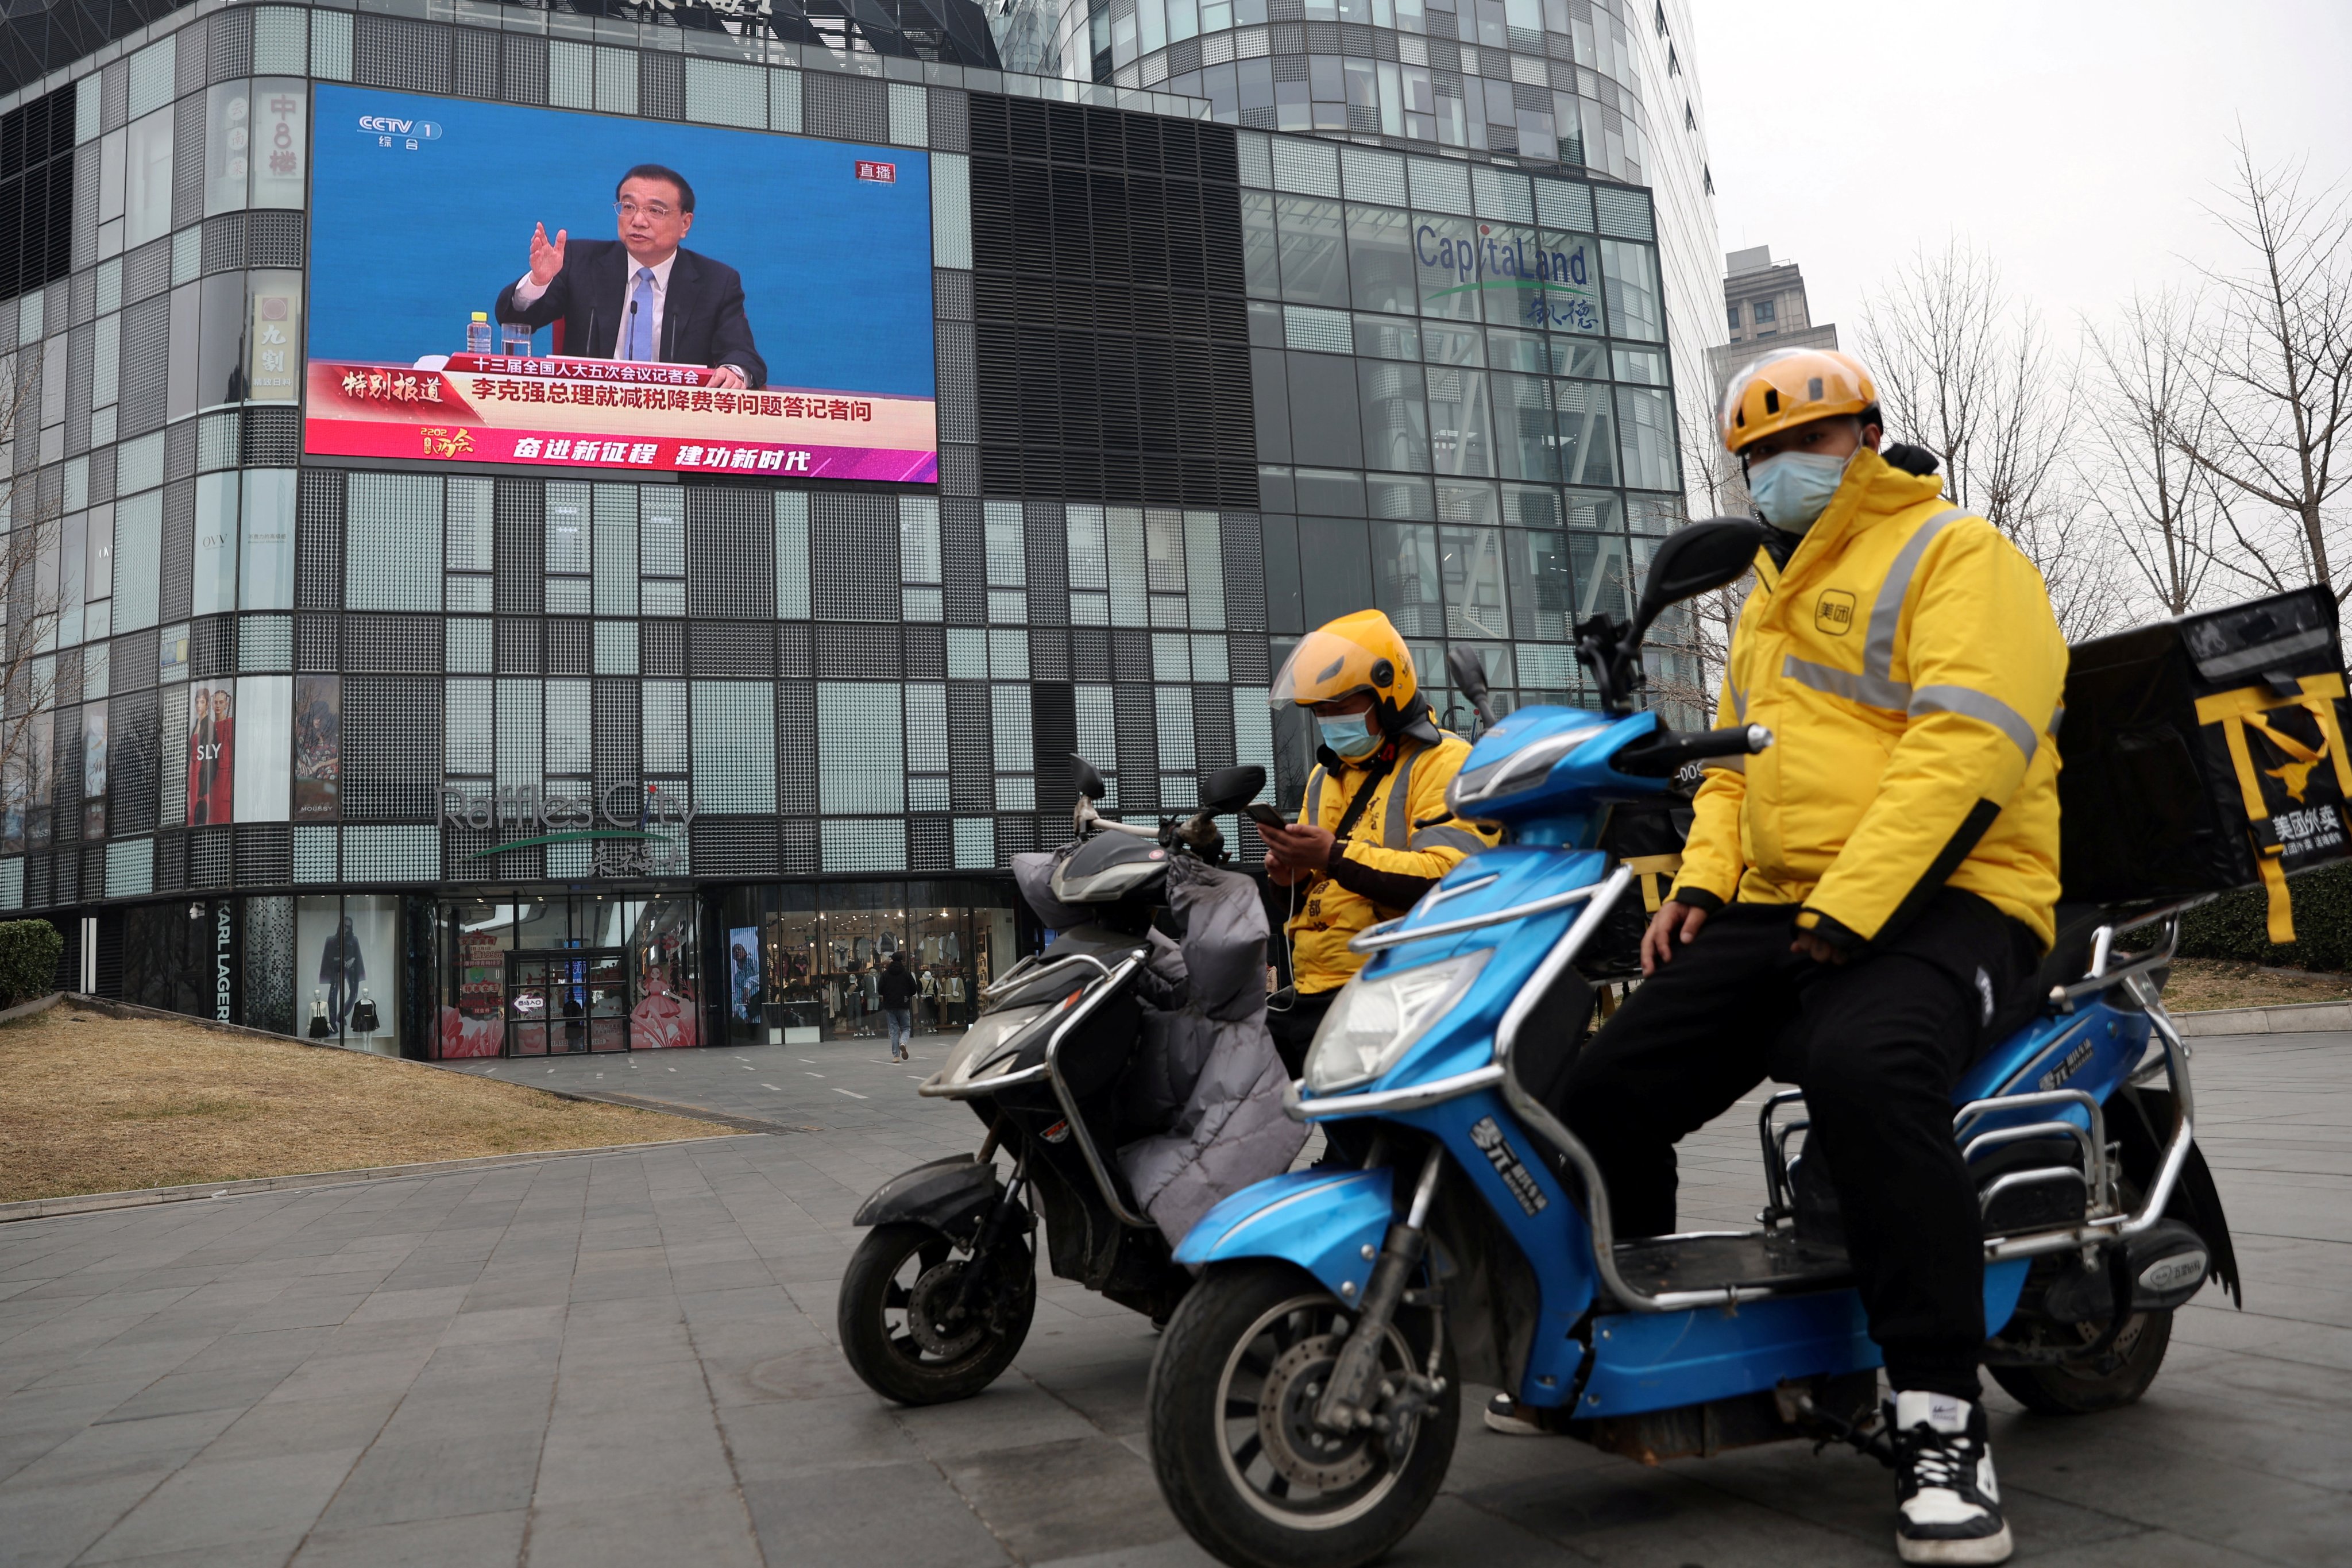 Meituan delivery drivers take a break near a giant screen showing a news conference by Premier Li Keqiang, following the closing session of the National People’s Congress in Beijing on March 11. Photo: Reuters 